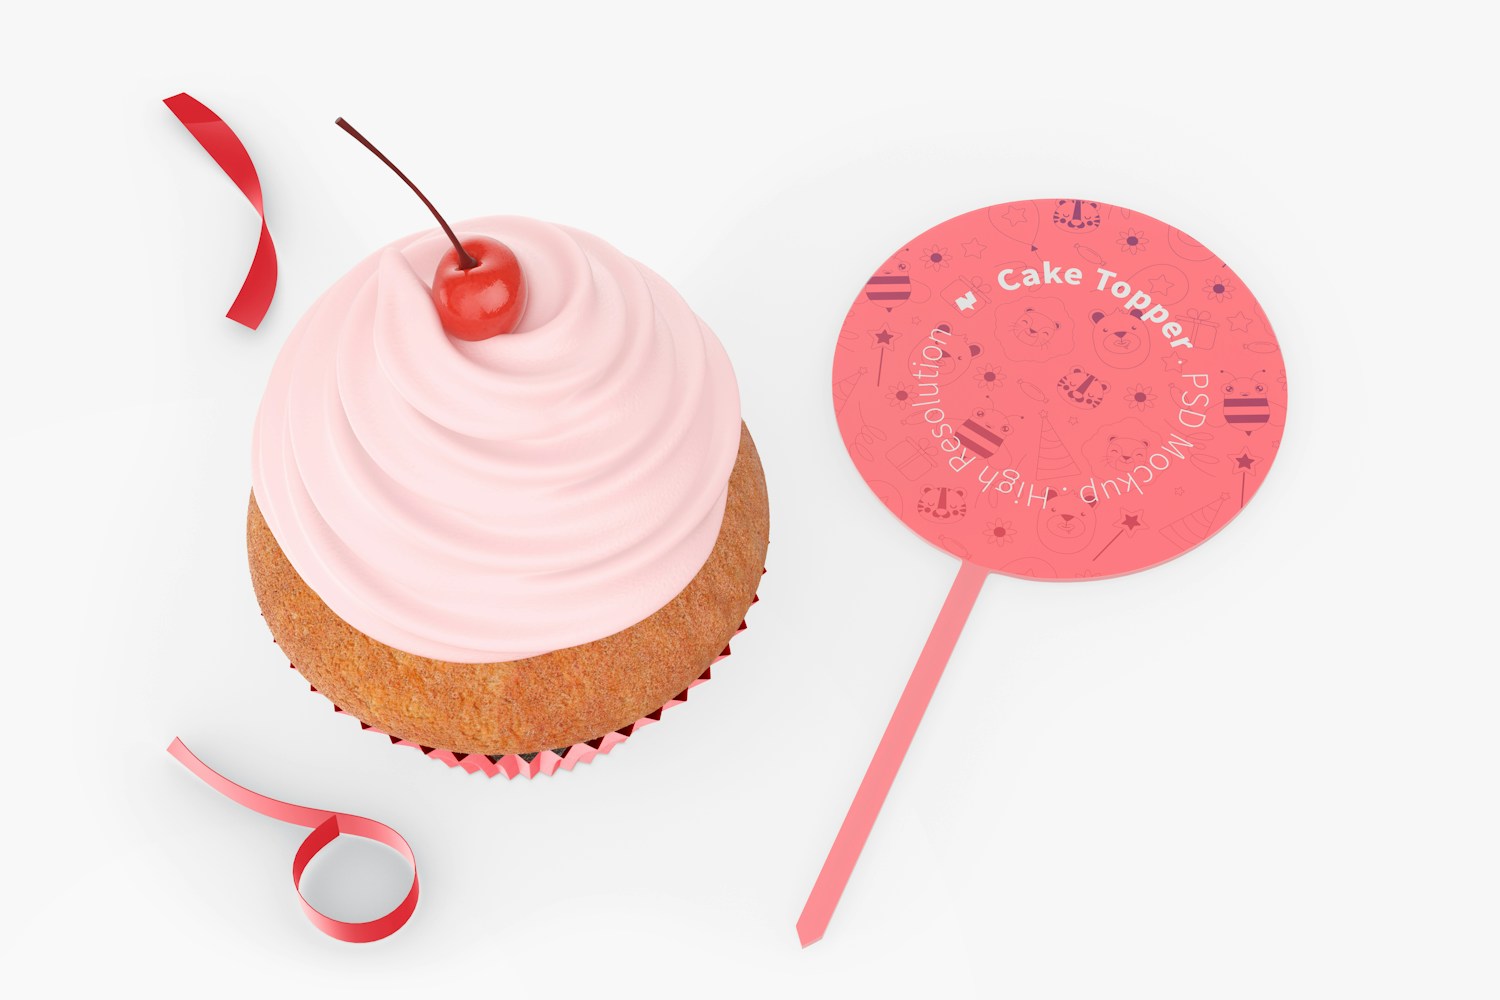 Cake Topper with Cupcake Mockup